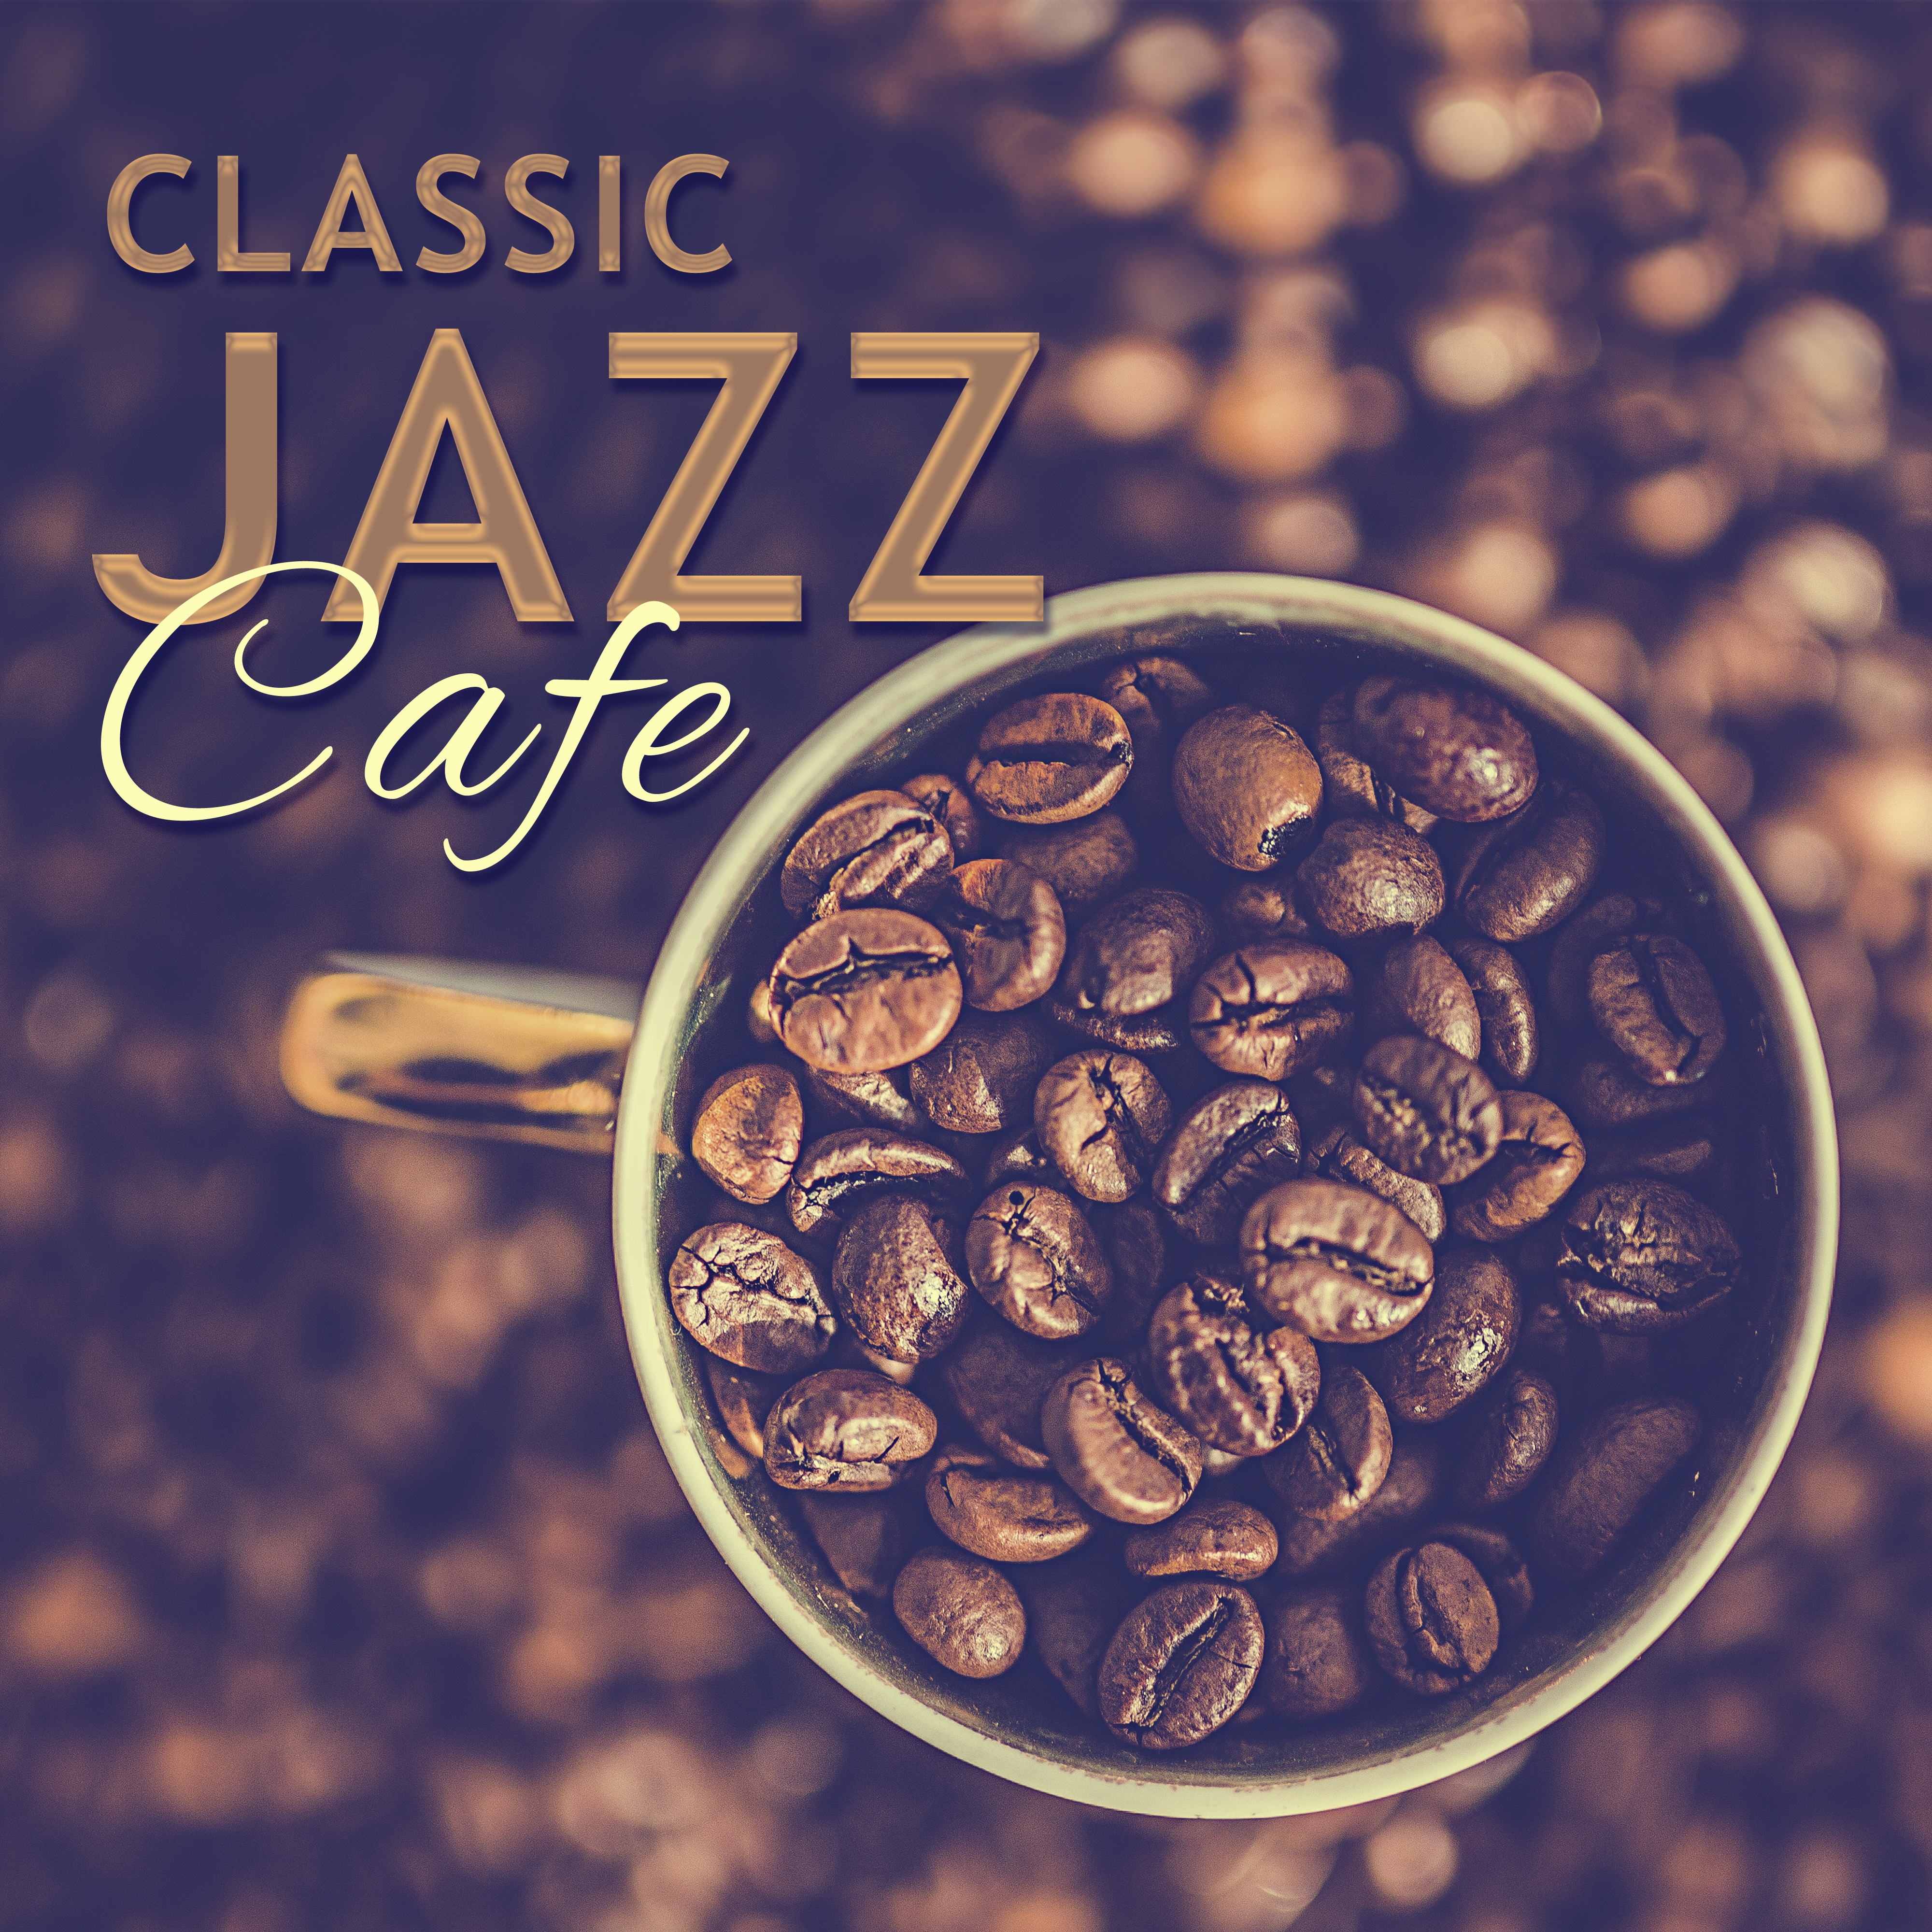 Classic Jazz Cafe  Jazz Essential for Relax, Coffee Talk, Music for Cafe  Restaurant